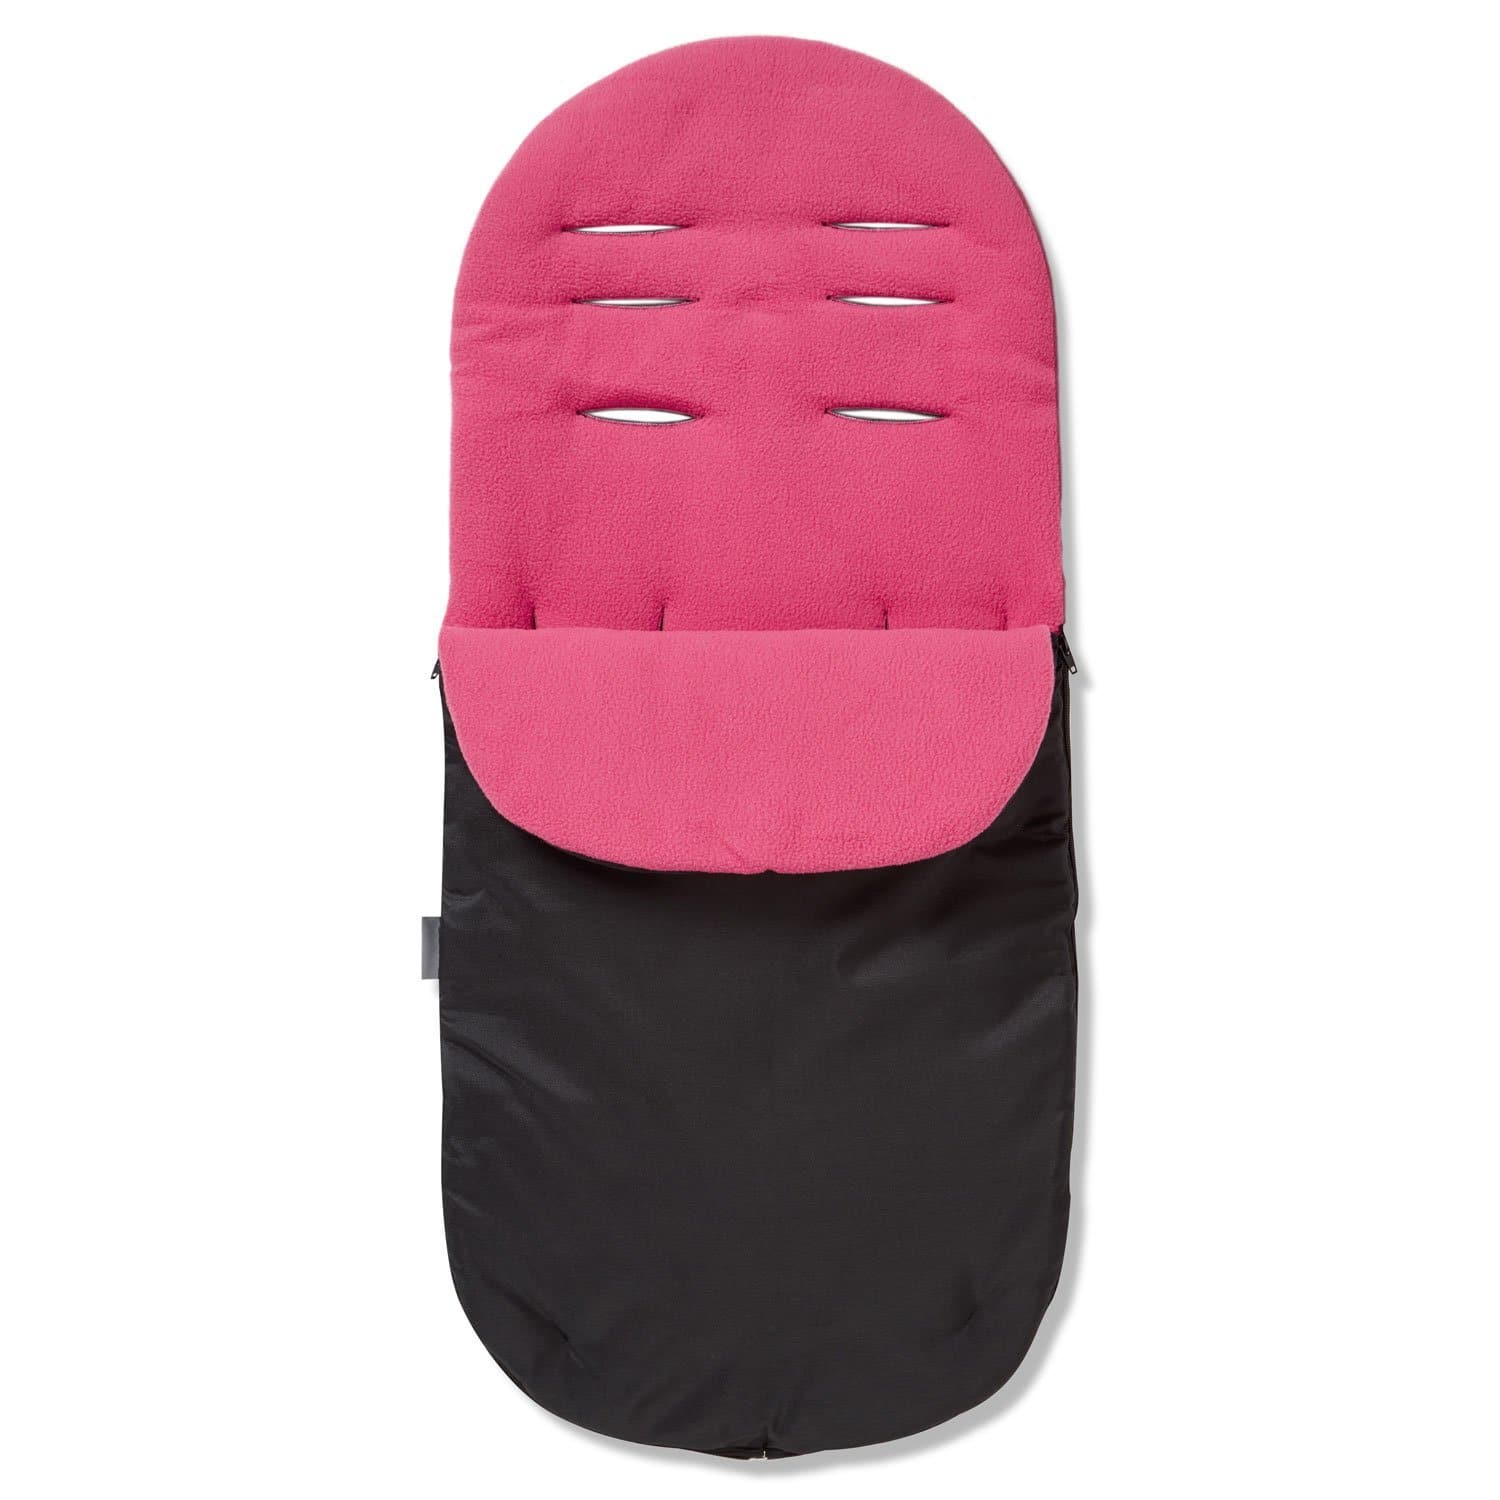 Footmuff / Cosy Toes Compatible with Nurse - Dark Pink / Fits All Models | For Your Little One